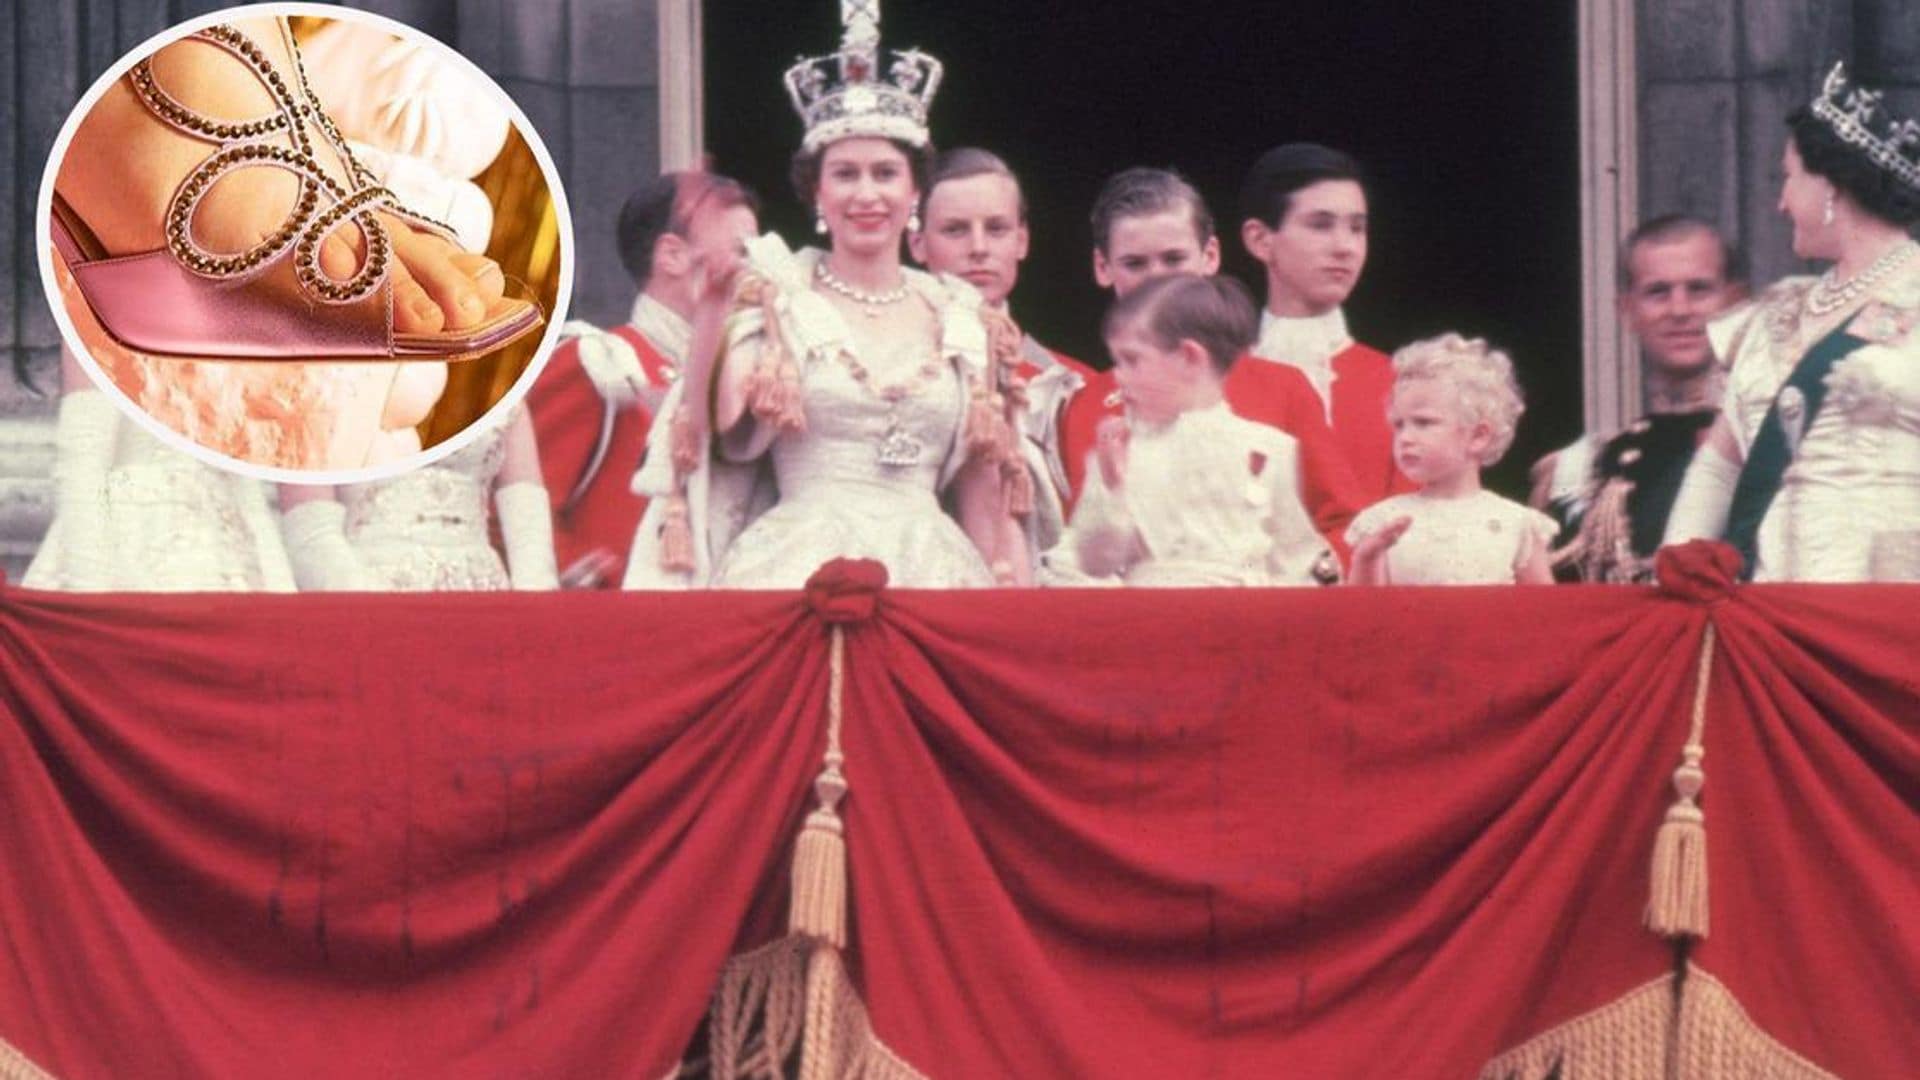 Queen Elizabeth’s coronation heels are making a stylish comeback in honor of her anniversary